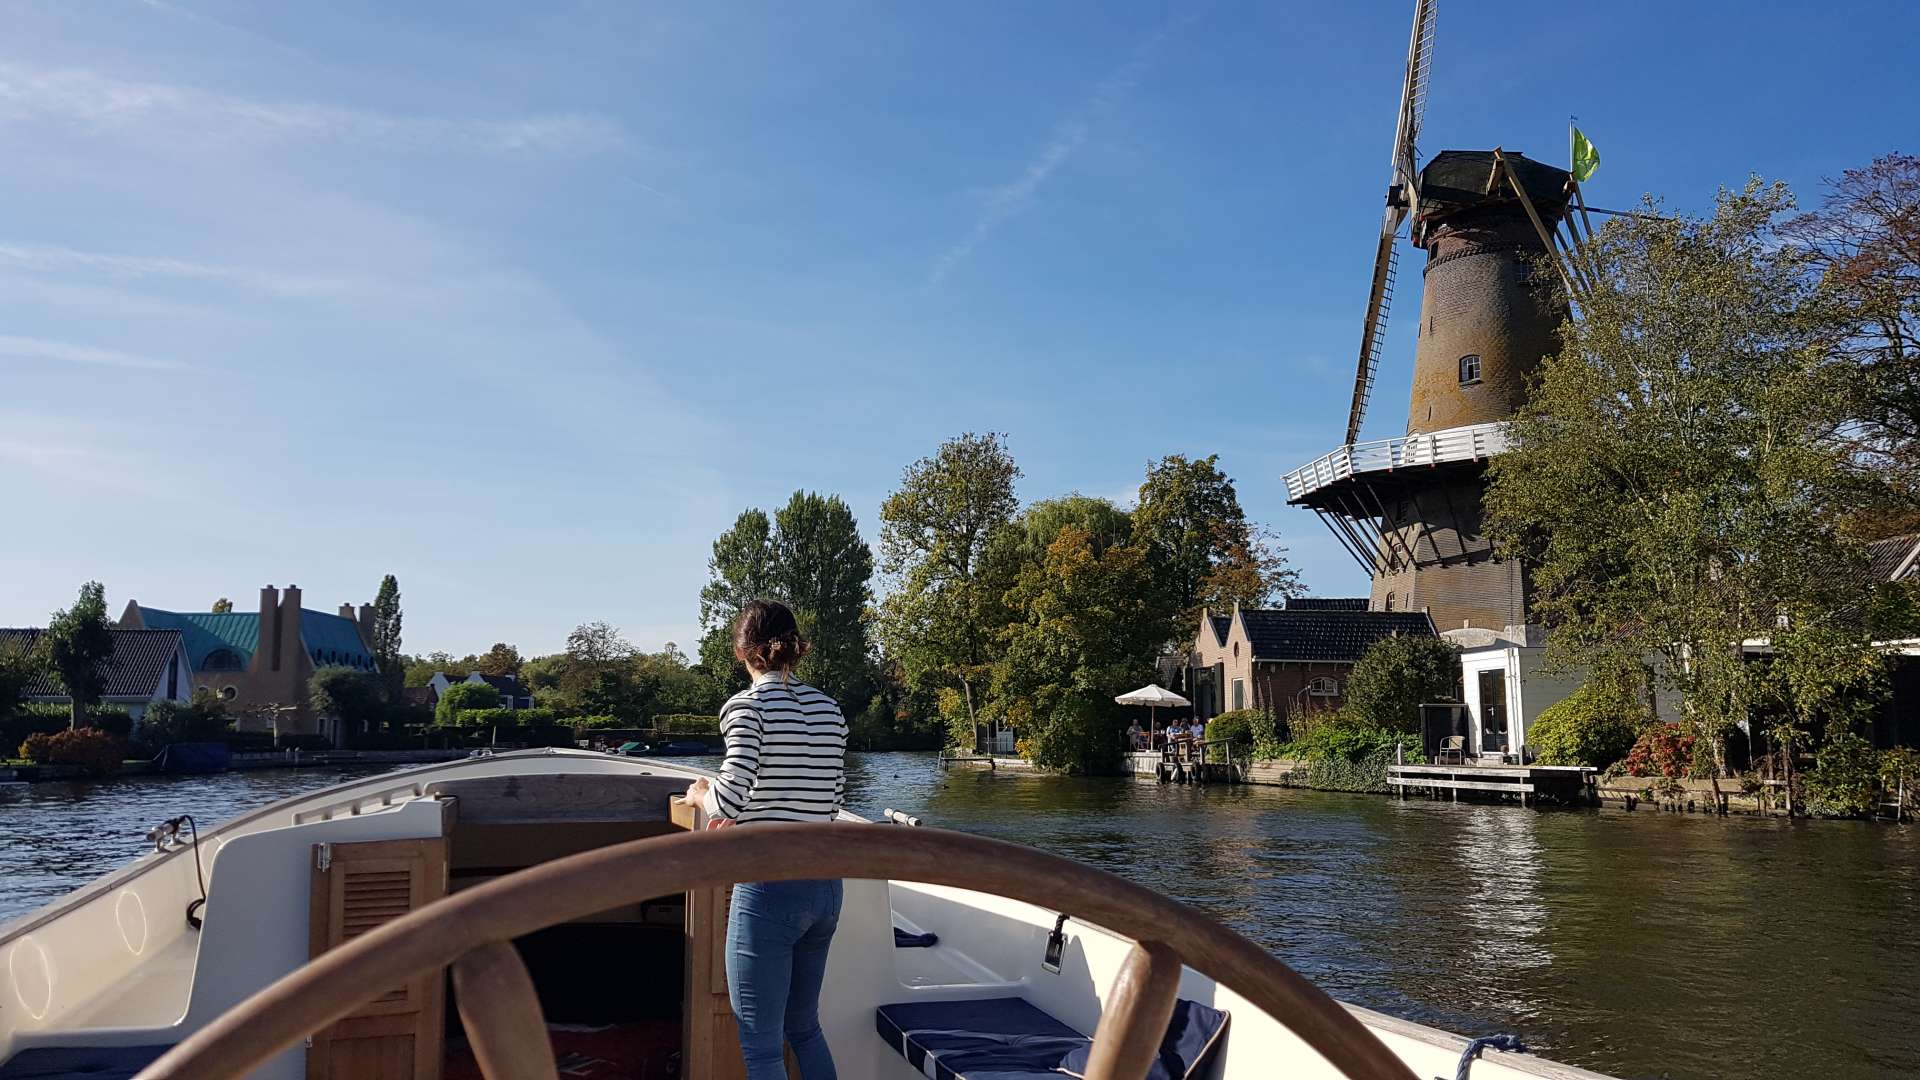 Amazing boat tour over the Amstel River